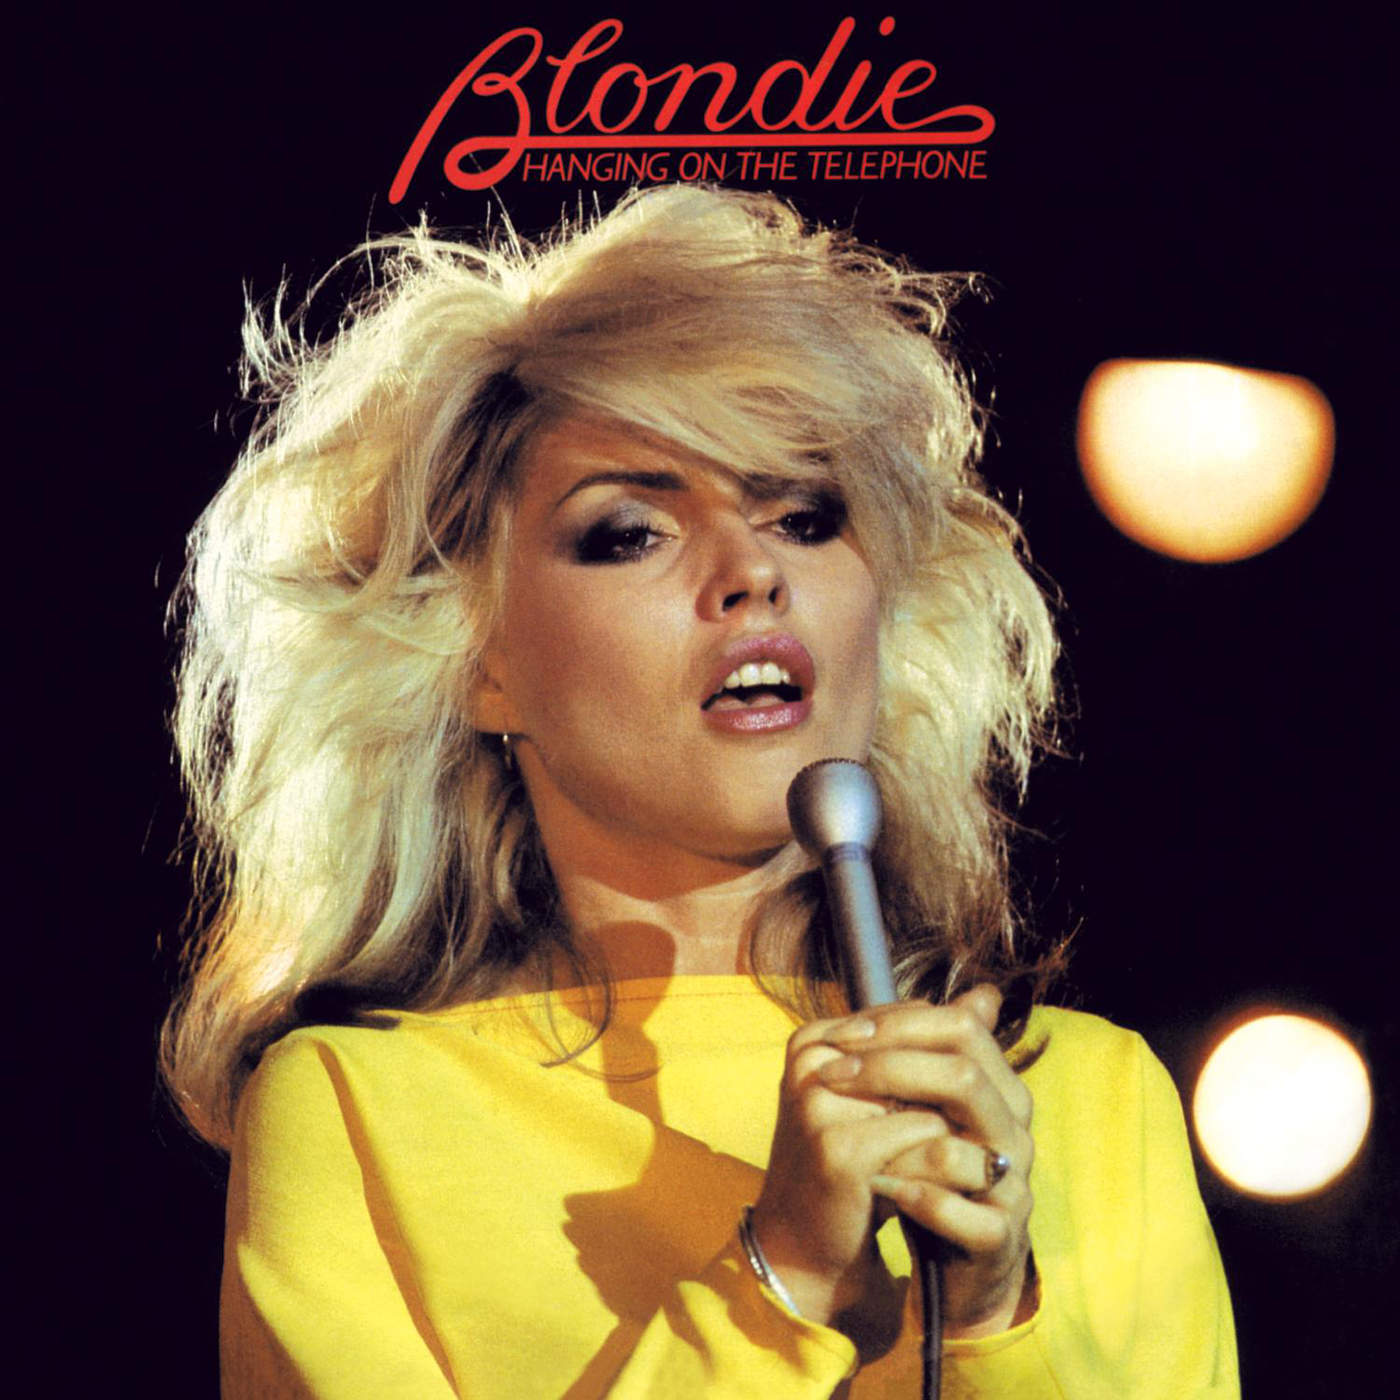 Art for Hanging On the Telephone by Blondie